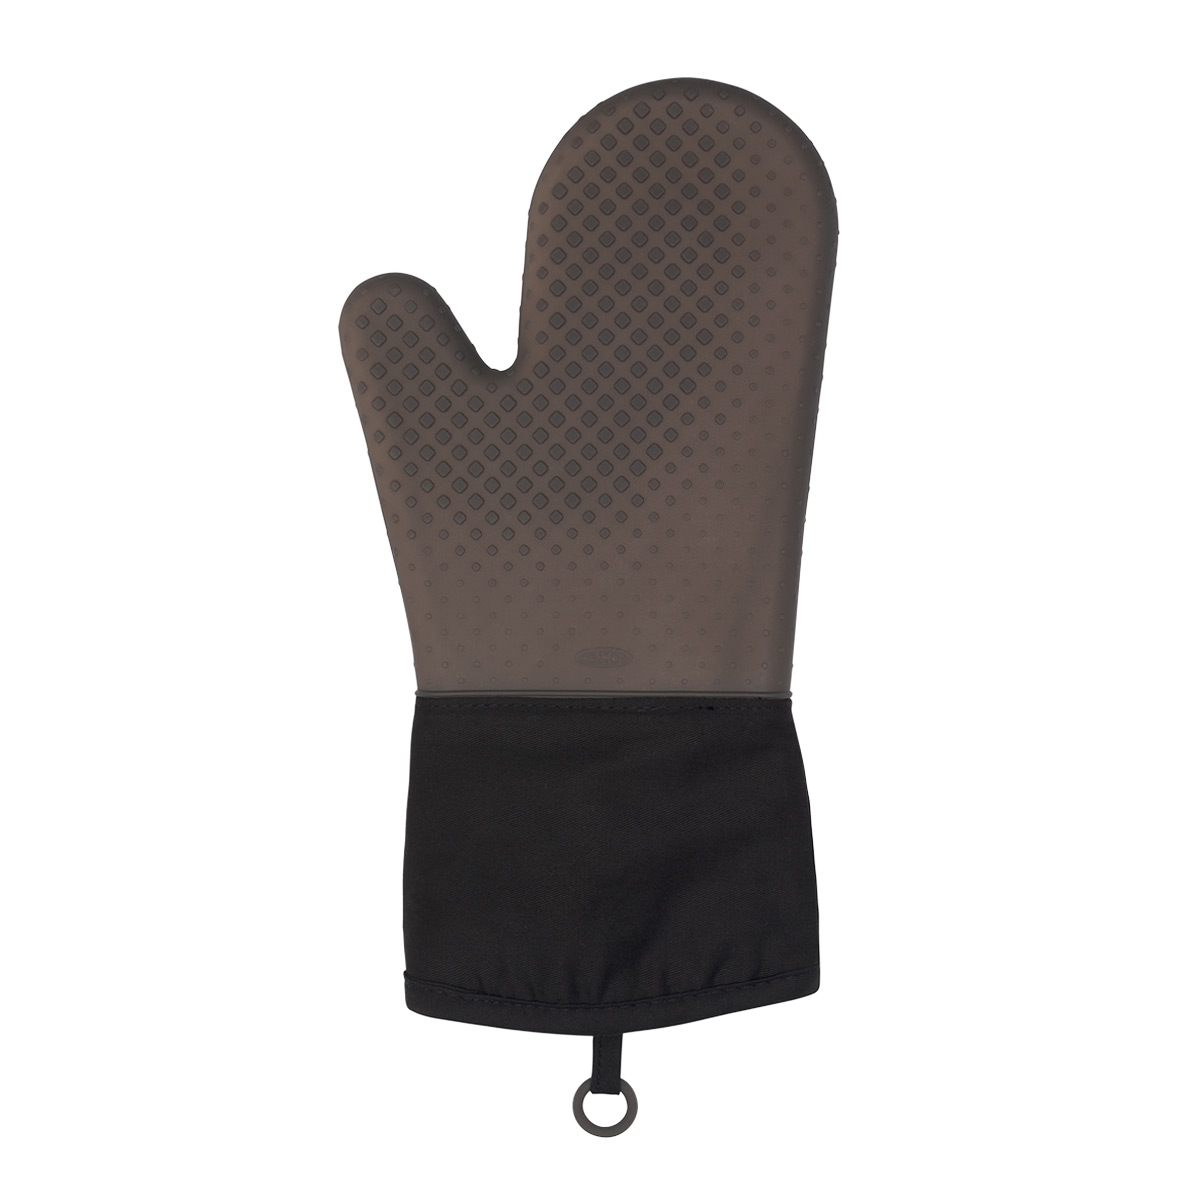 https://www.containerstore.com/catalogimages/347570/10076038-OXO-Silicone-Oven-Mitt-VEN1.jpg